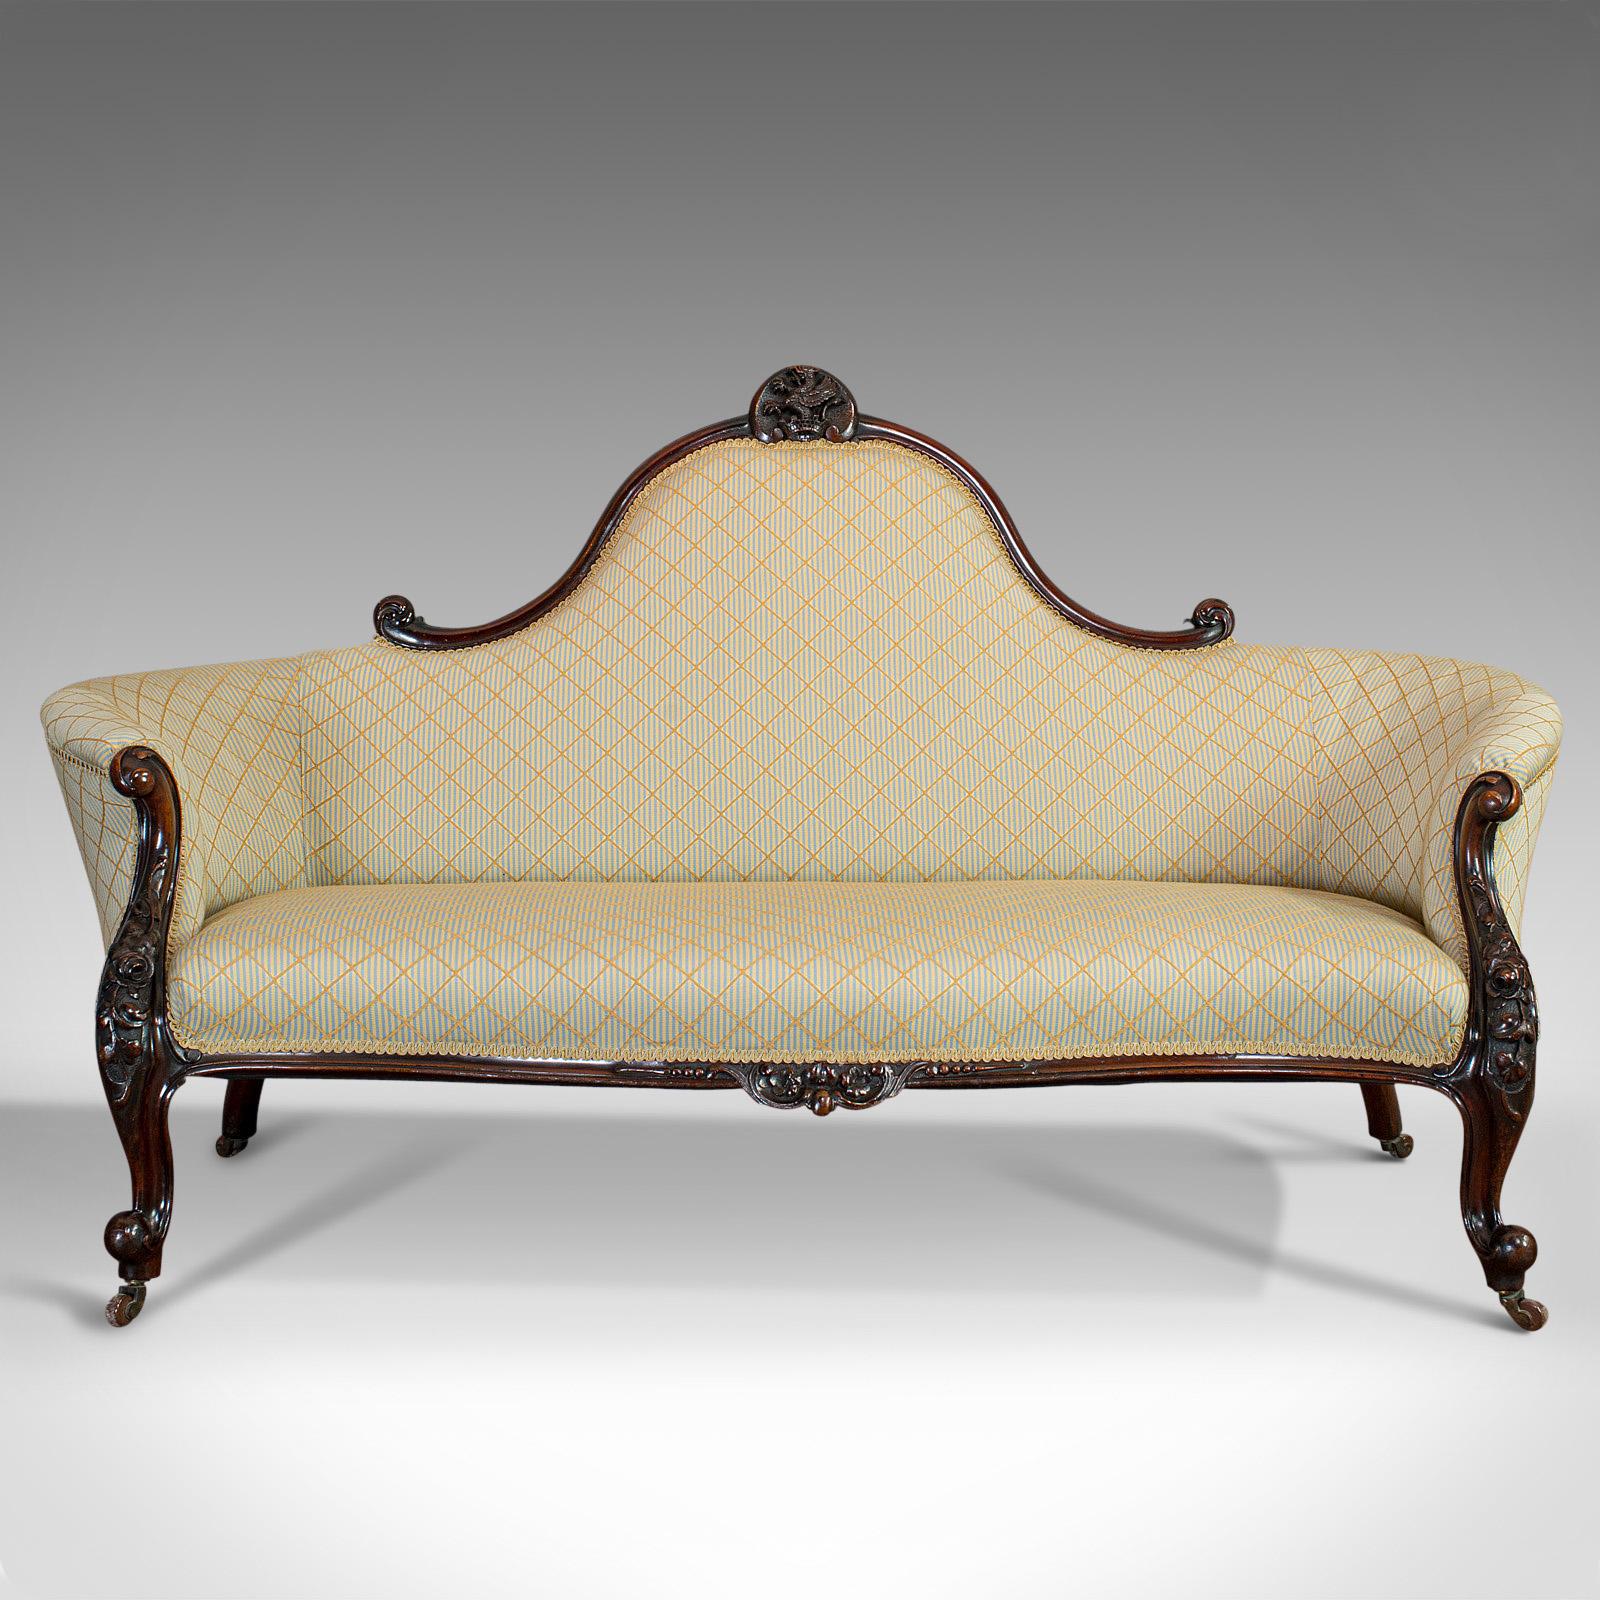 This is an antique spoon back sofa. An English, walnut and textile 2 person settee, dating to the early Victorian period, circa 1840.

Highly appealing, early Victorian sofa
Displays a desirable aged patina
Select walnut shows fine grain